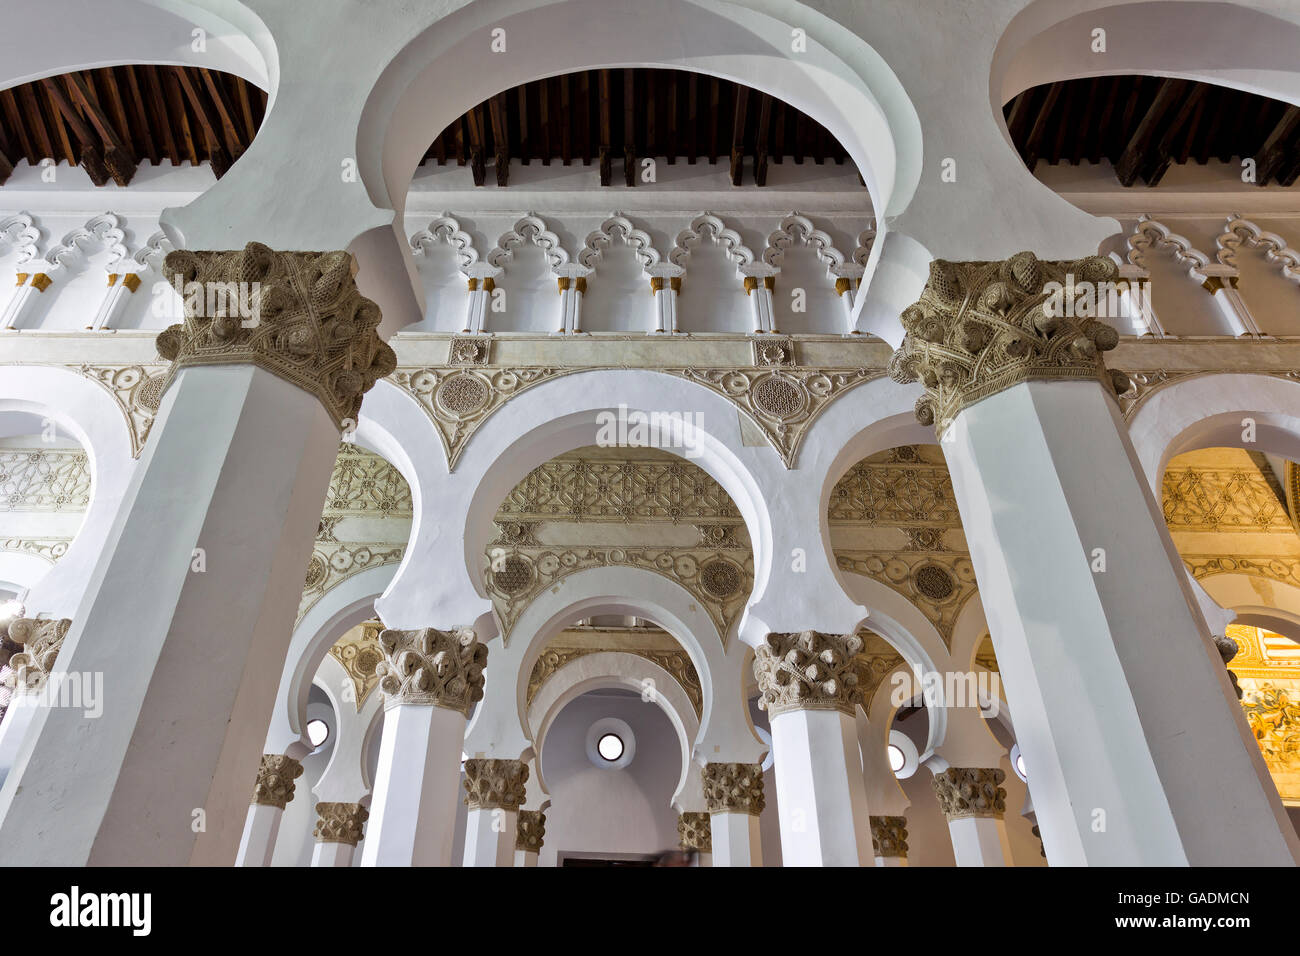 Mudejar arches inside the Santa Maria la Blanca synagogue in Toledo, Spain.The synagoge dates to the 13th century. Stock Photo